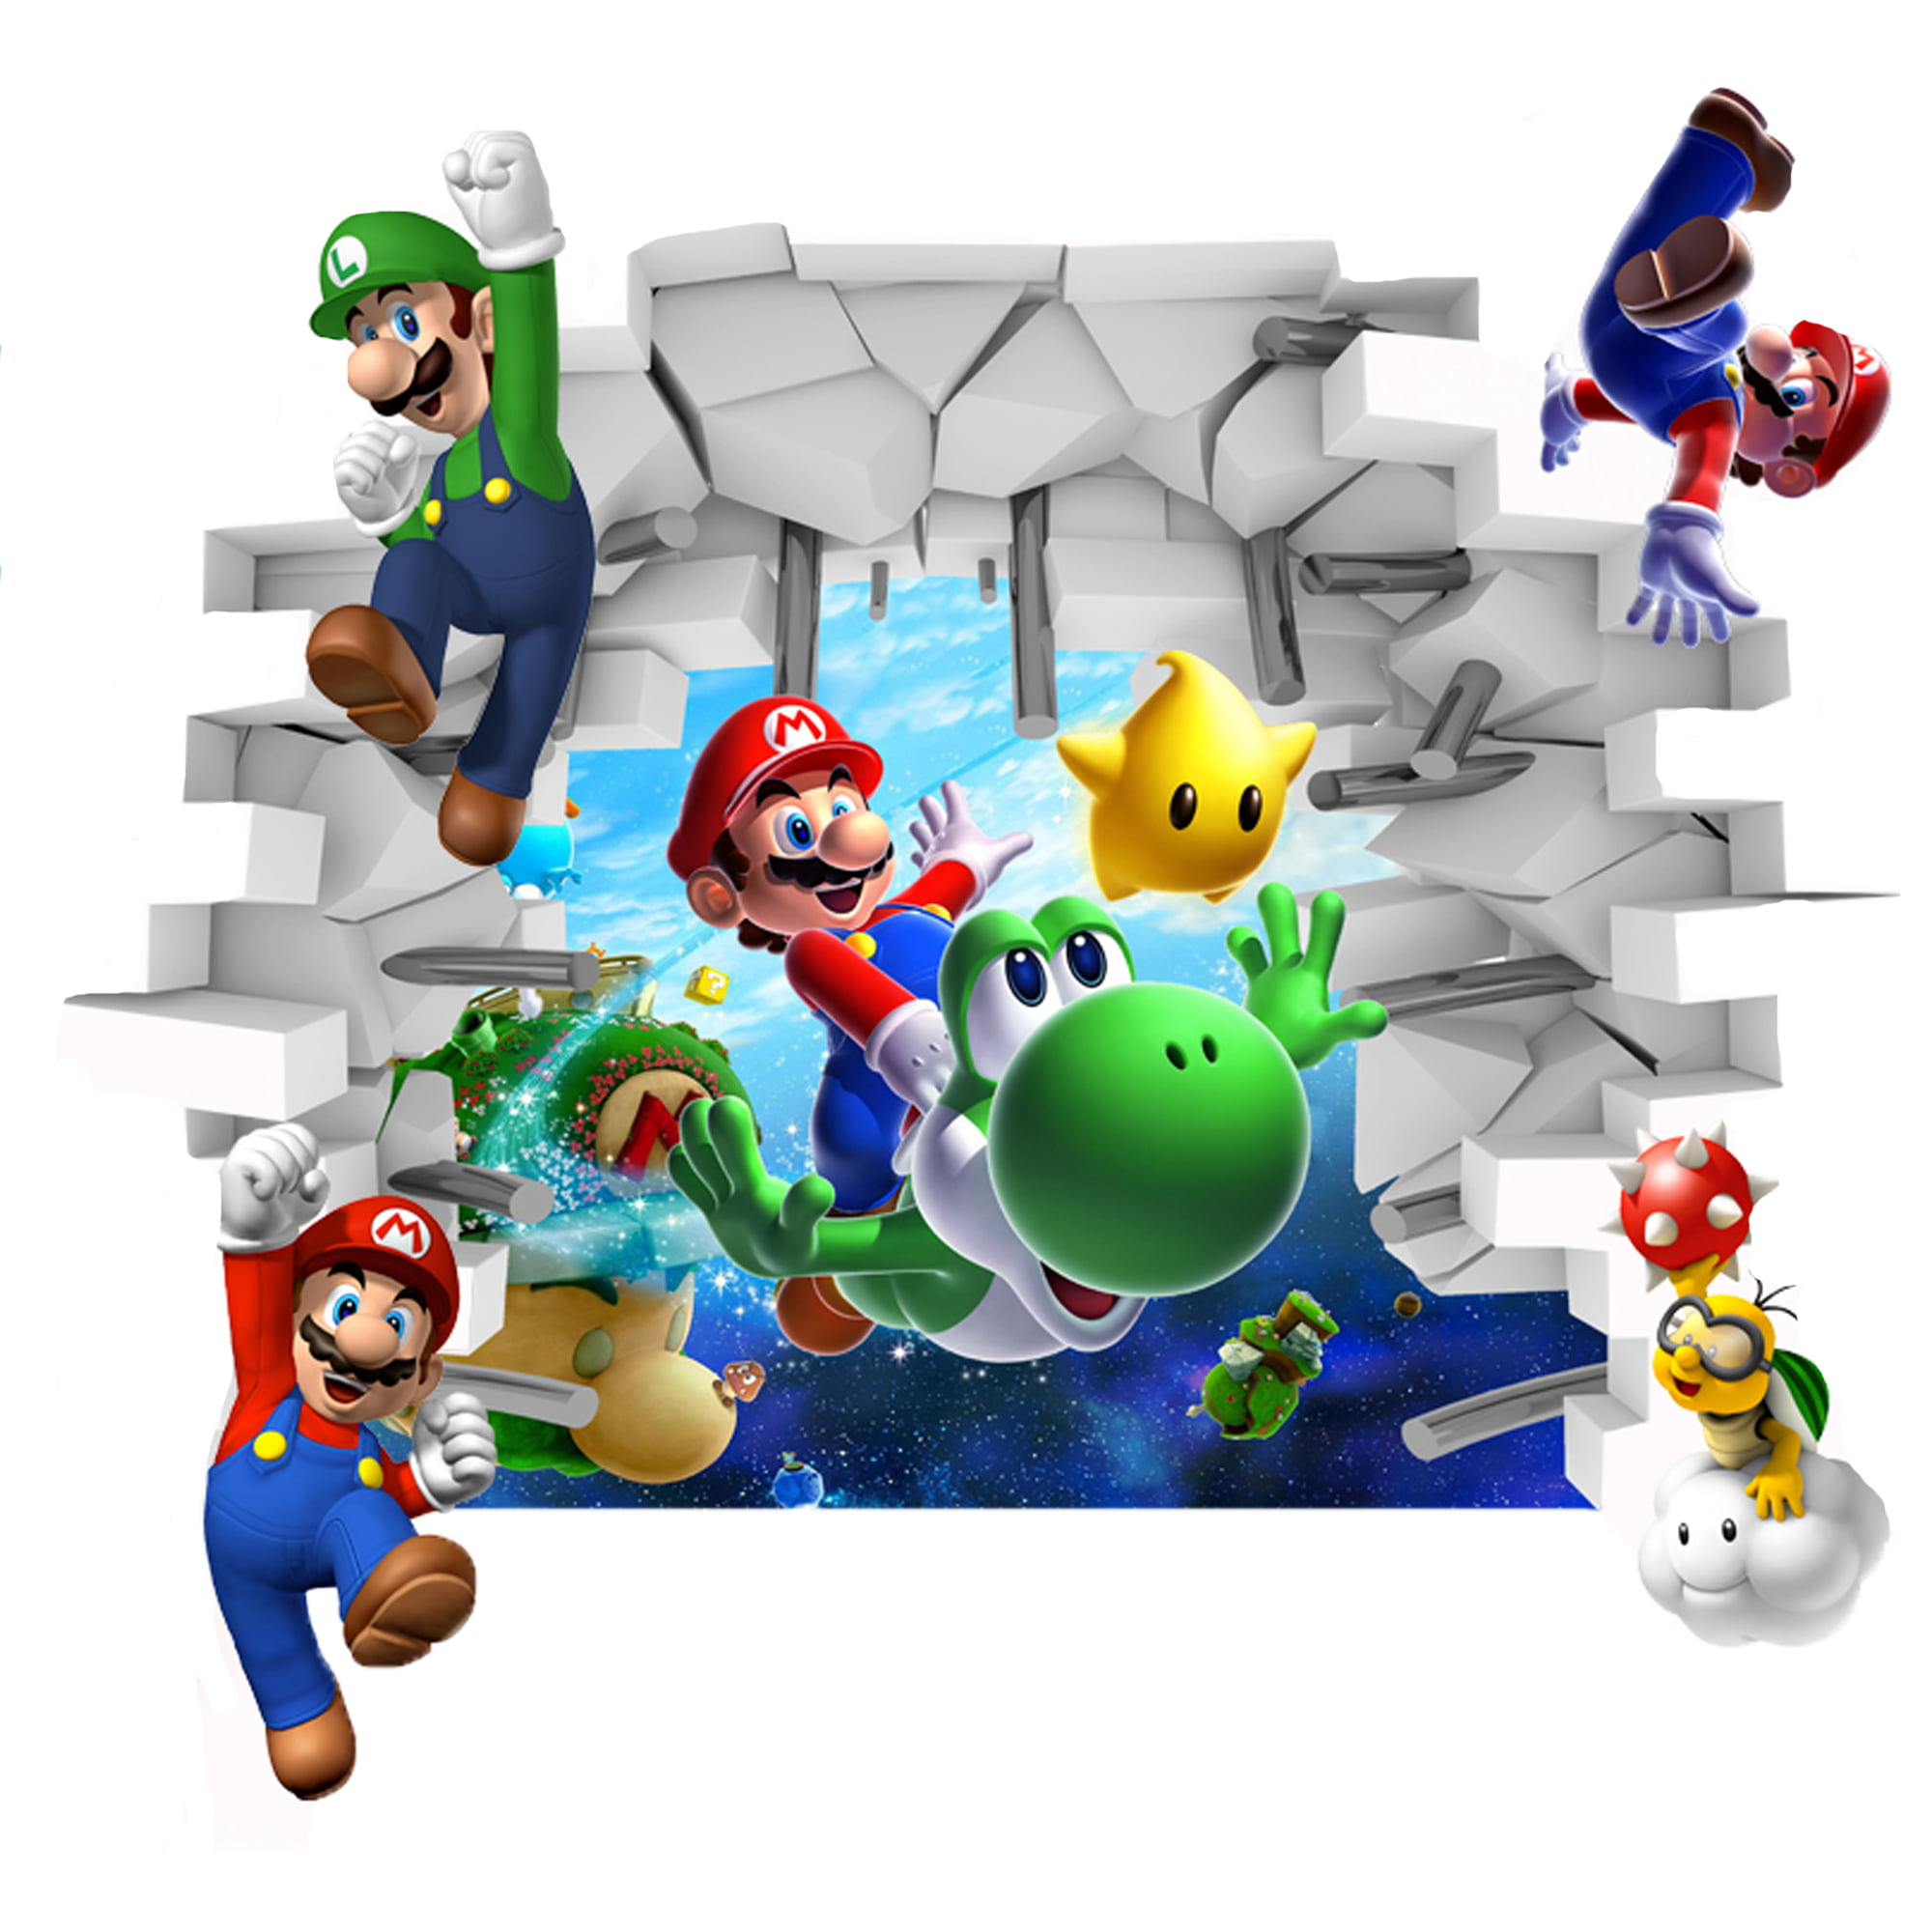 Super Mario Bedroom Background Removable 3D Wall Sticker Decal Home Decor 